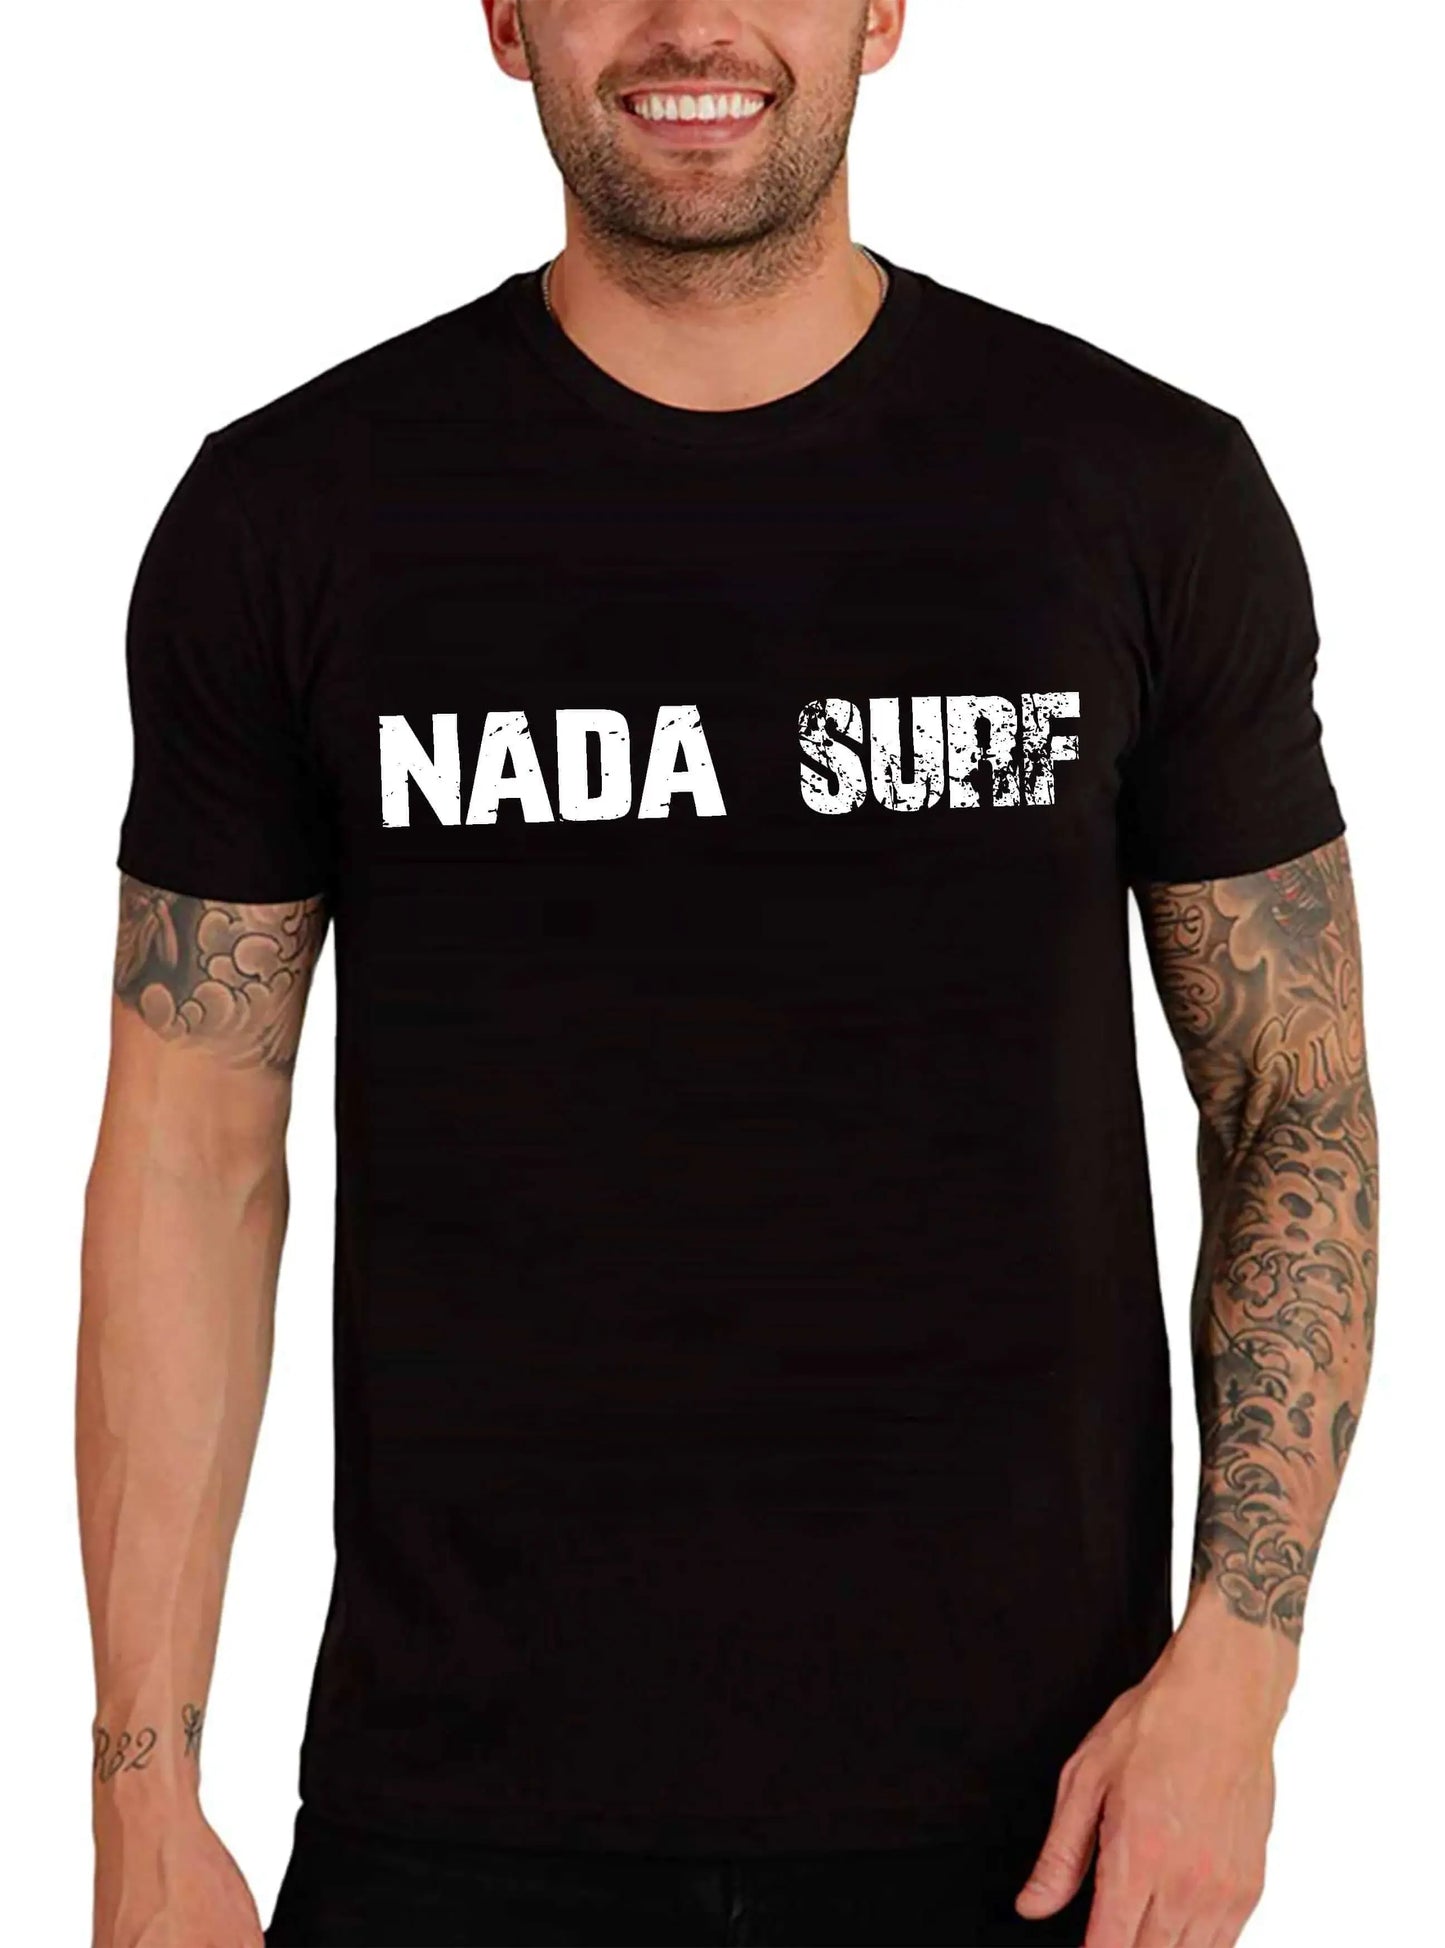 Men's Graphic T-Shirt Nada Surf Eco-Friendly Limited Edition Short Sleeve Tee-Shirt Vintage Birthday Gift Novelty